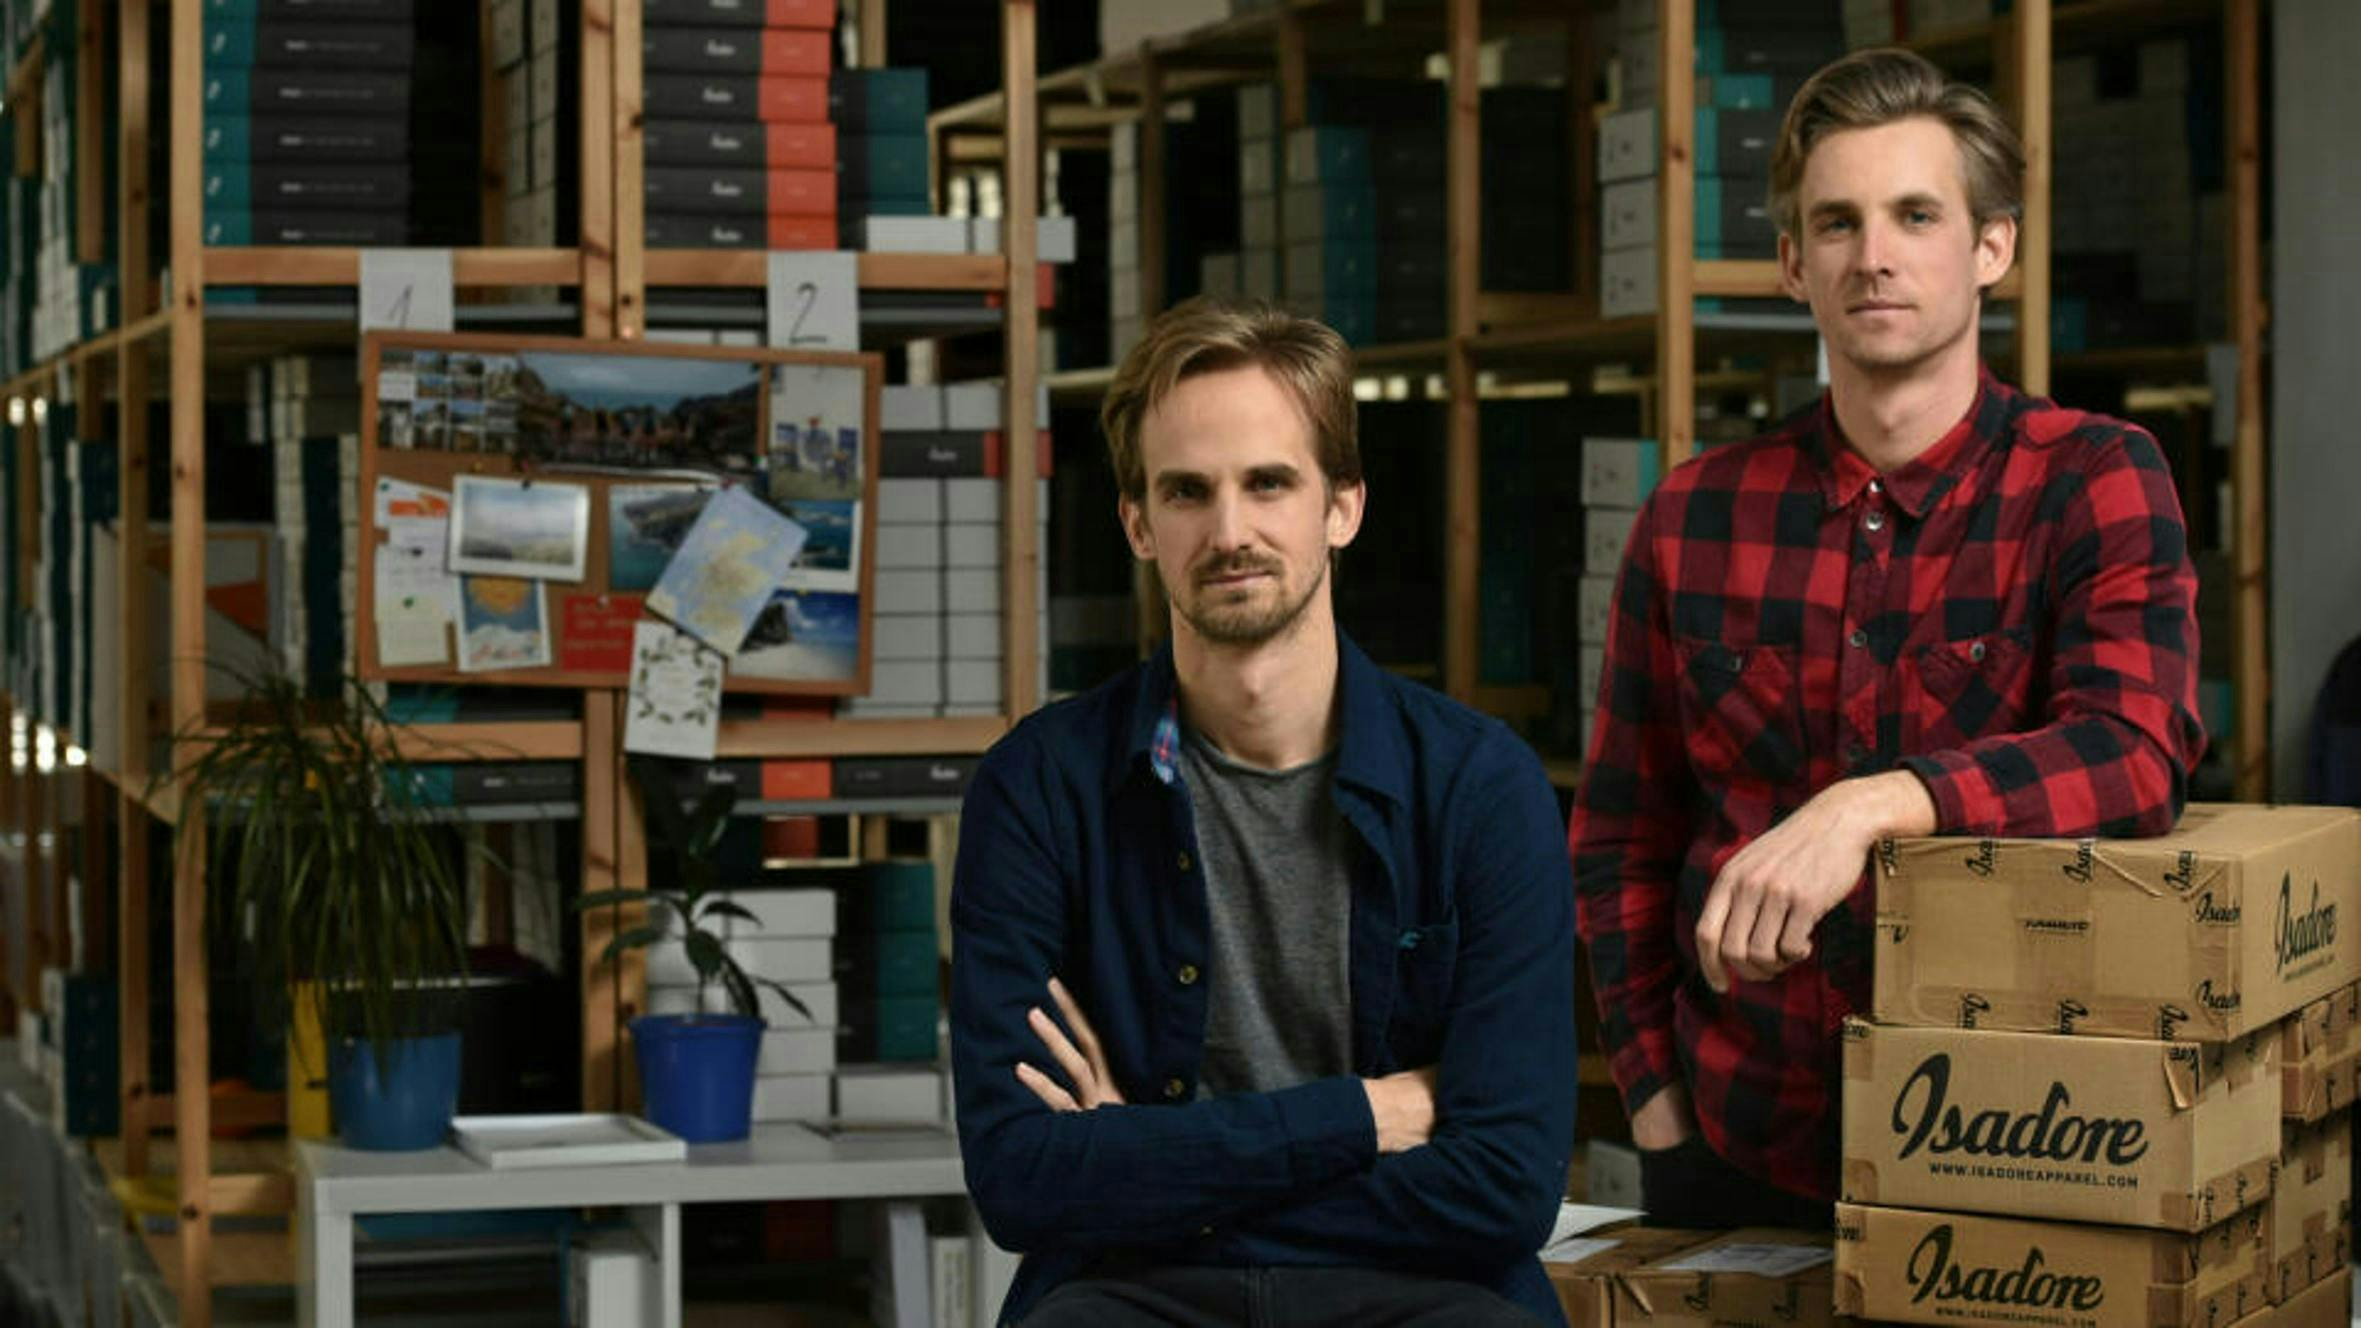 Velits brothers’ Isadore Apparel raises €2.1 million in another investment round